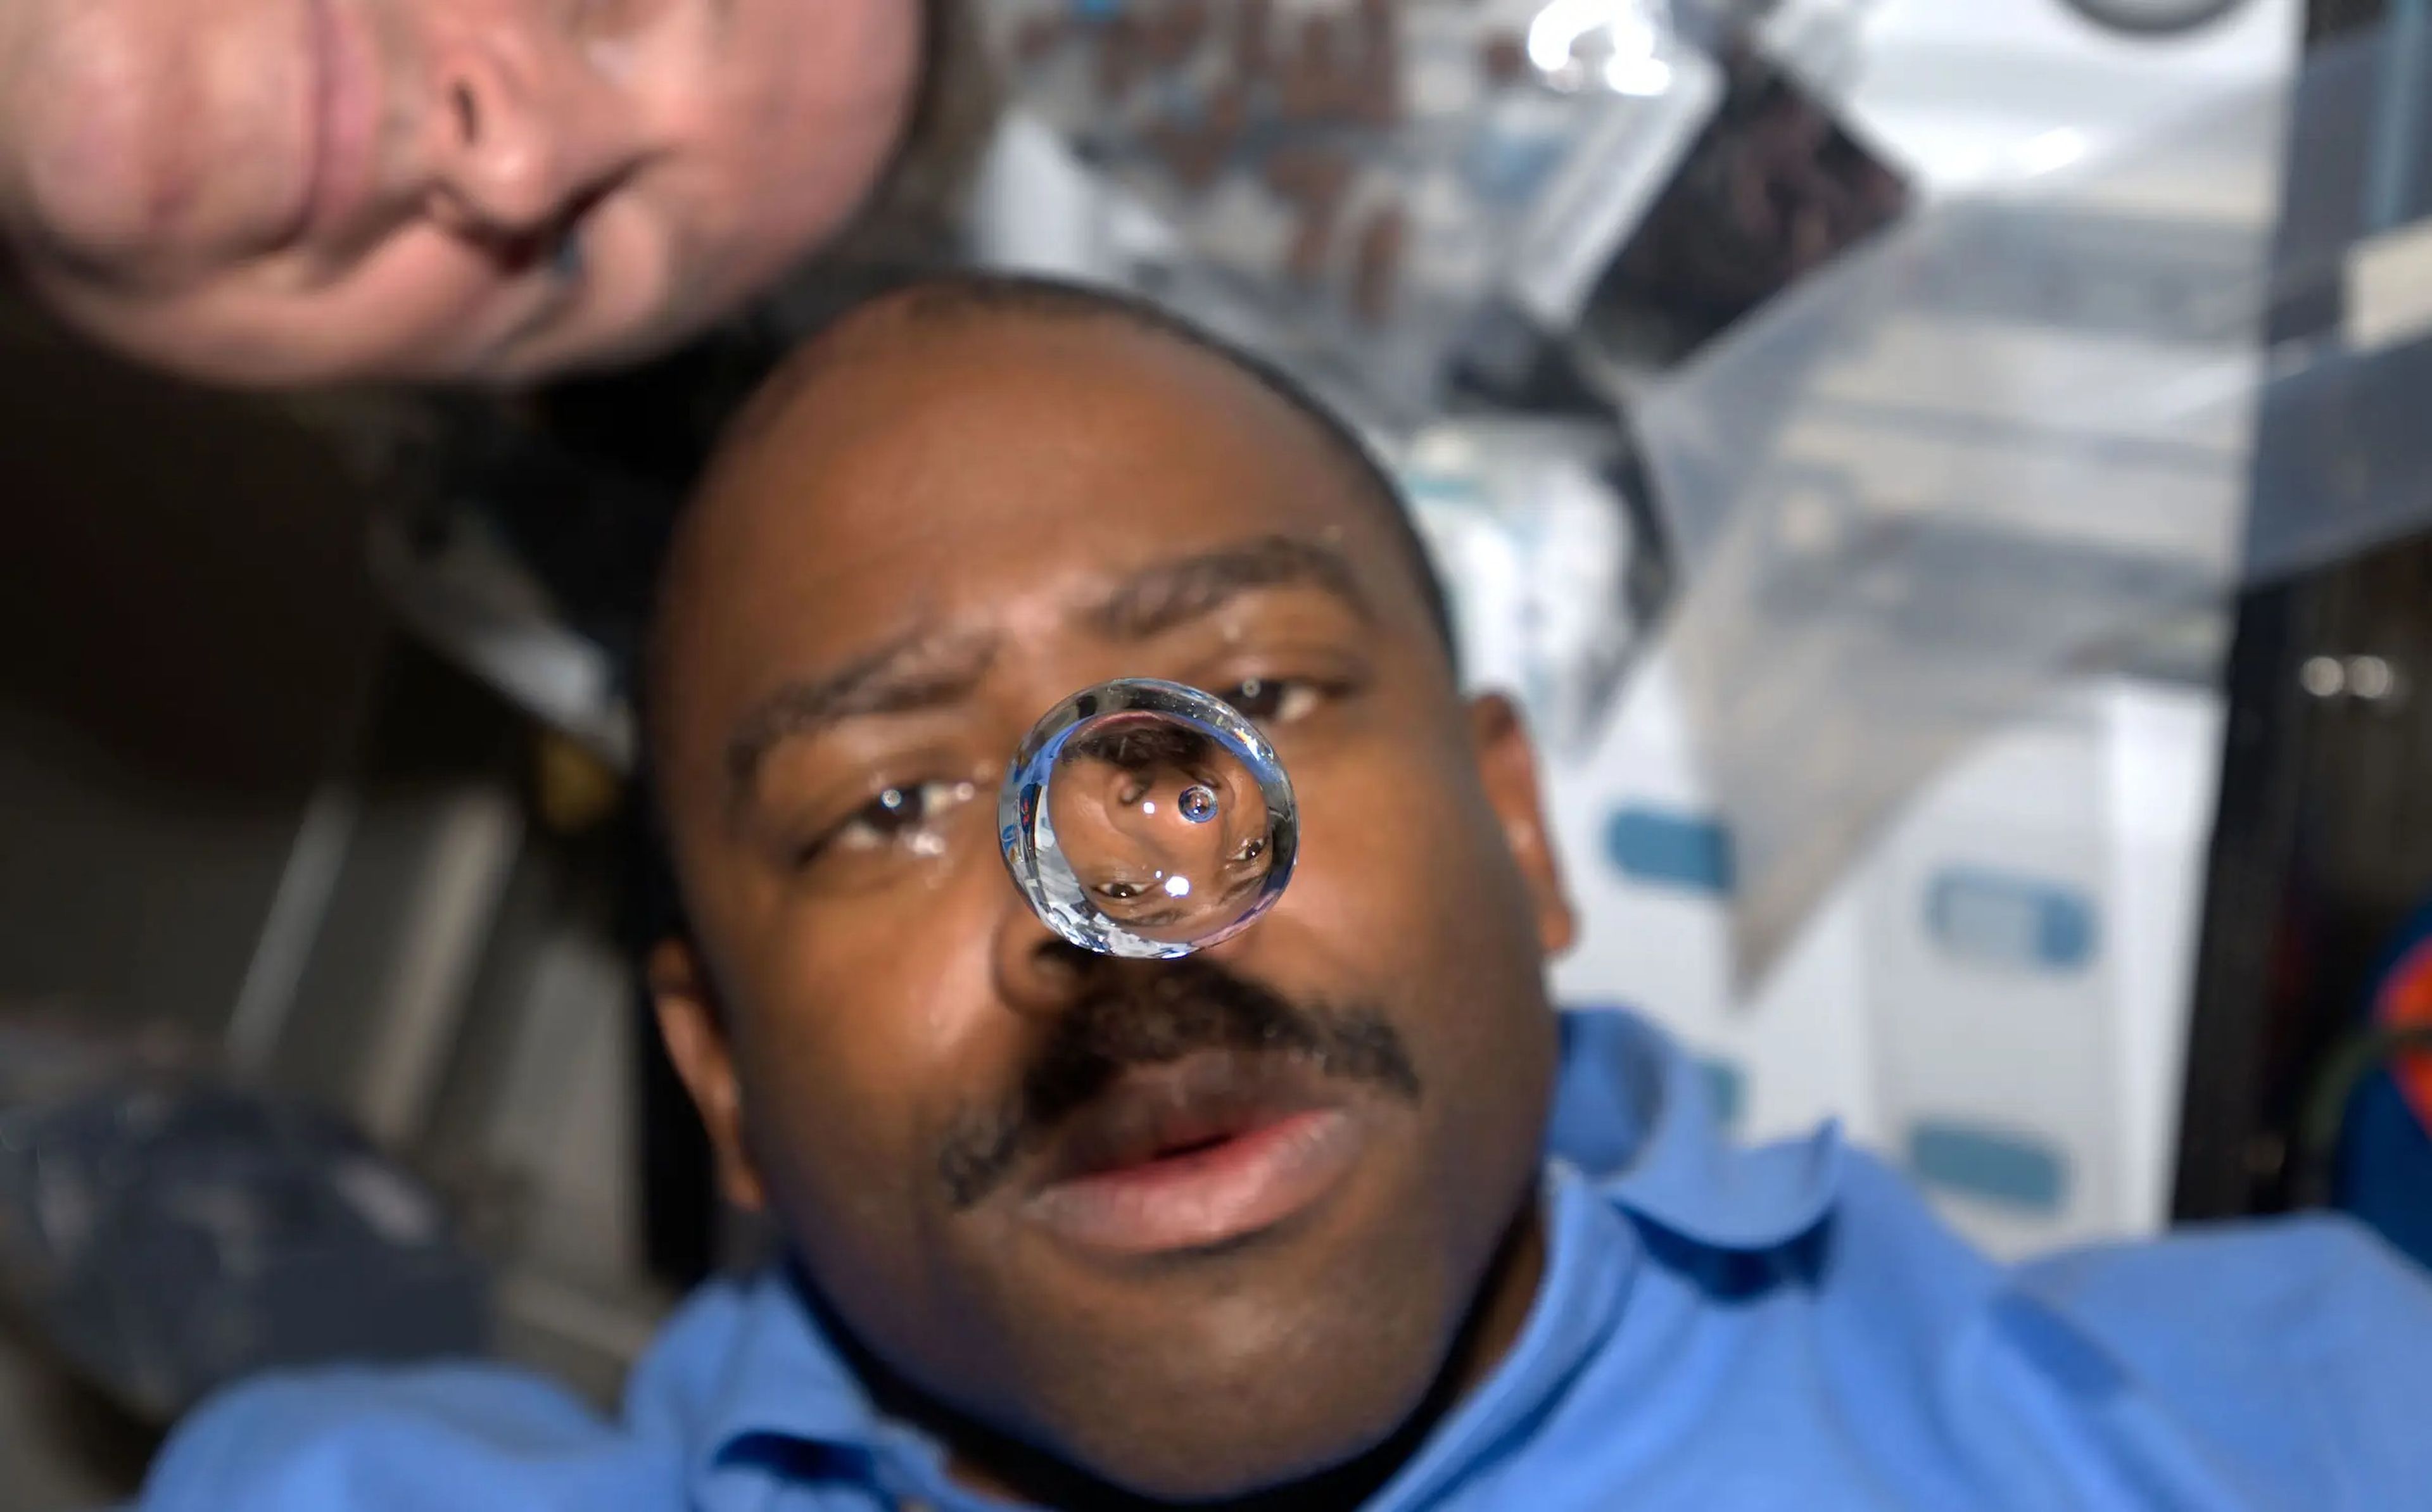 Astronaut Leland Melvin observes a bubble of water floating in the center deck of the space shuttle Atlantis.